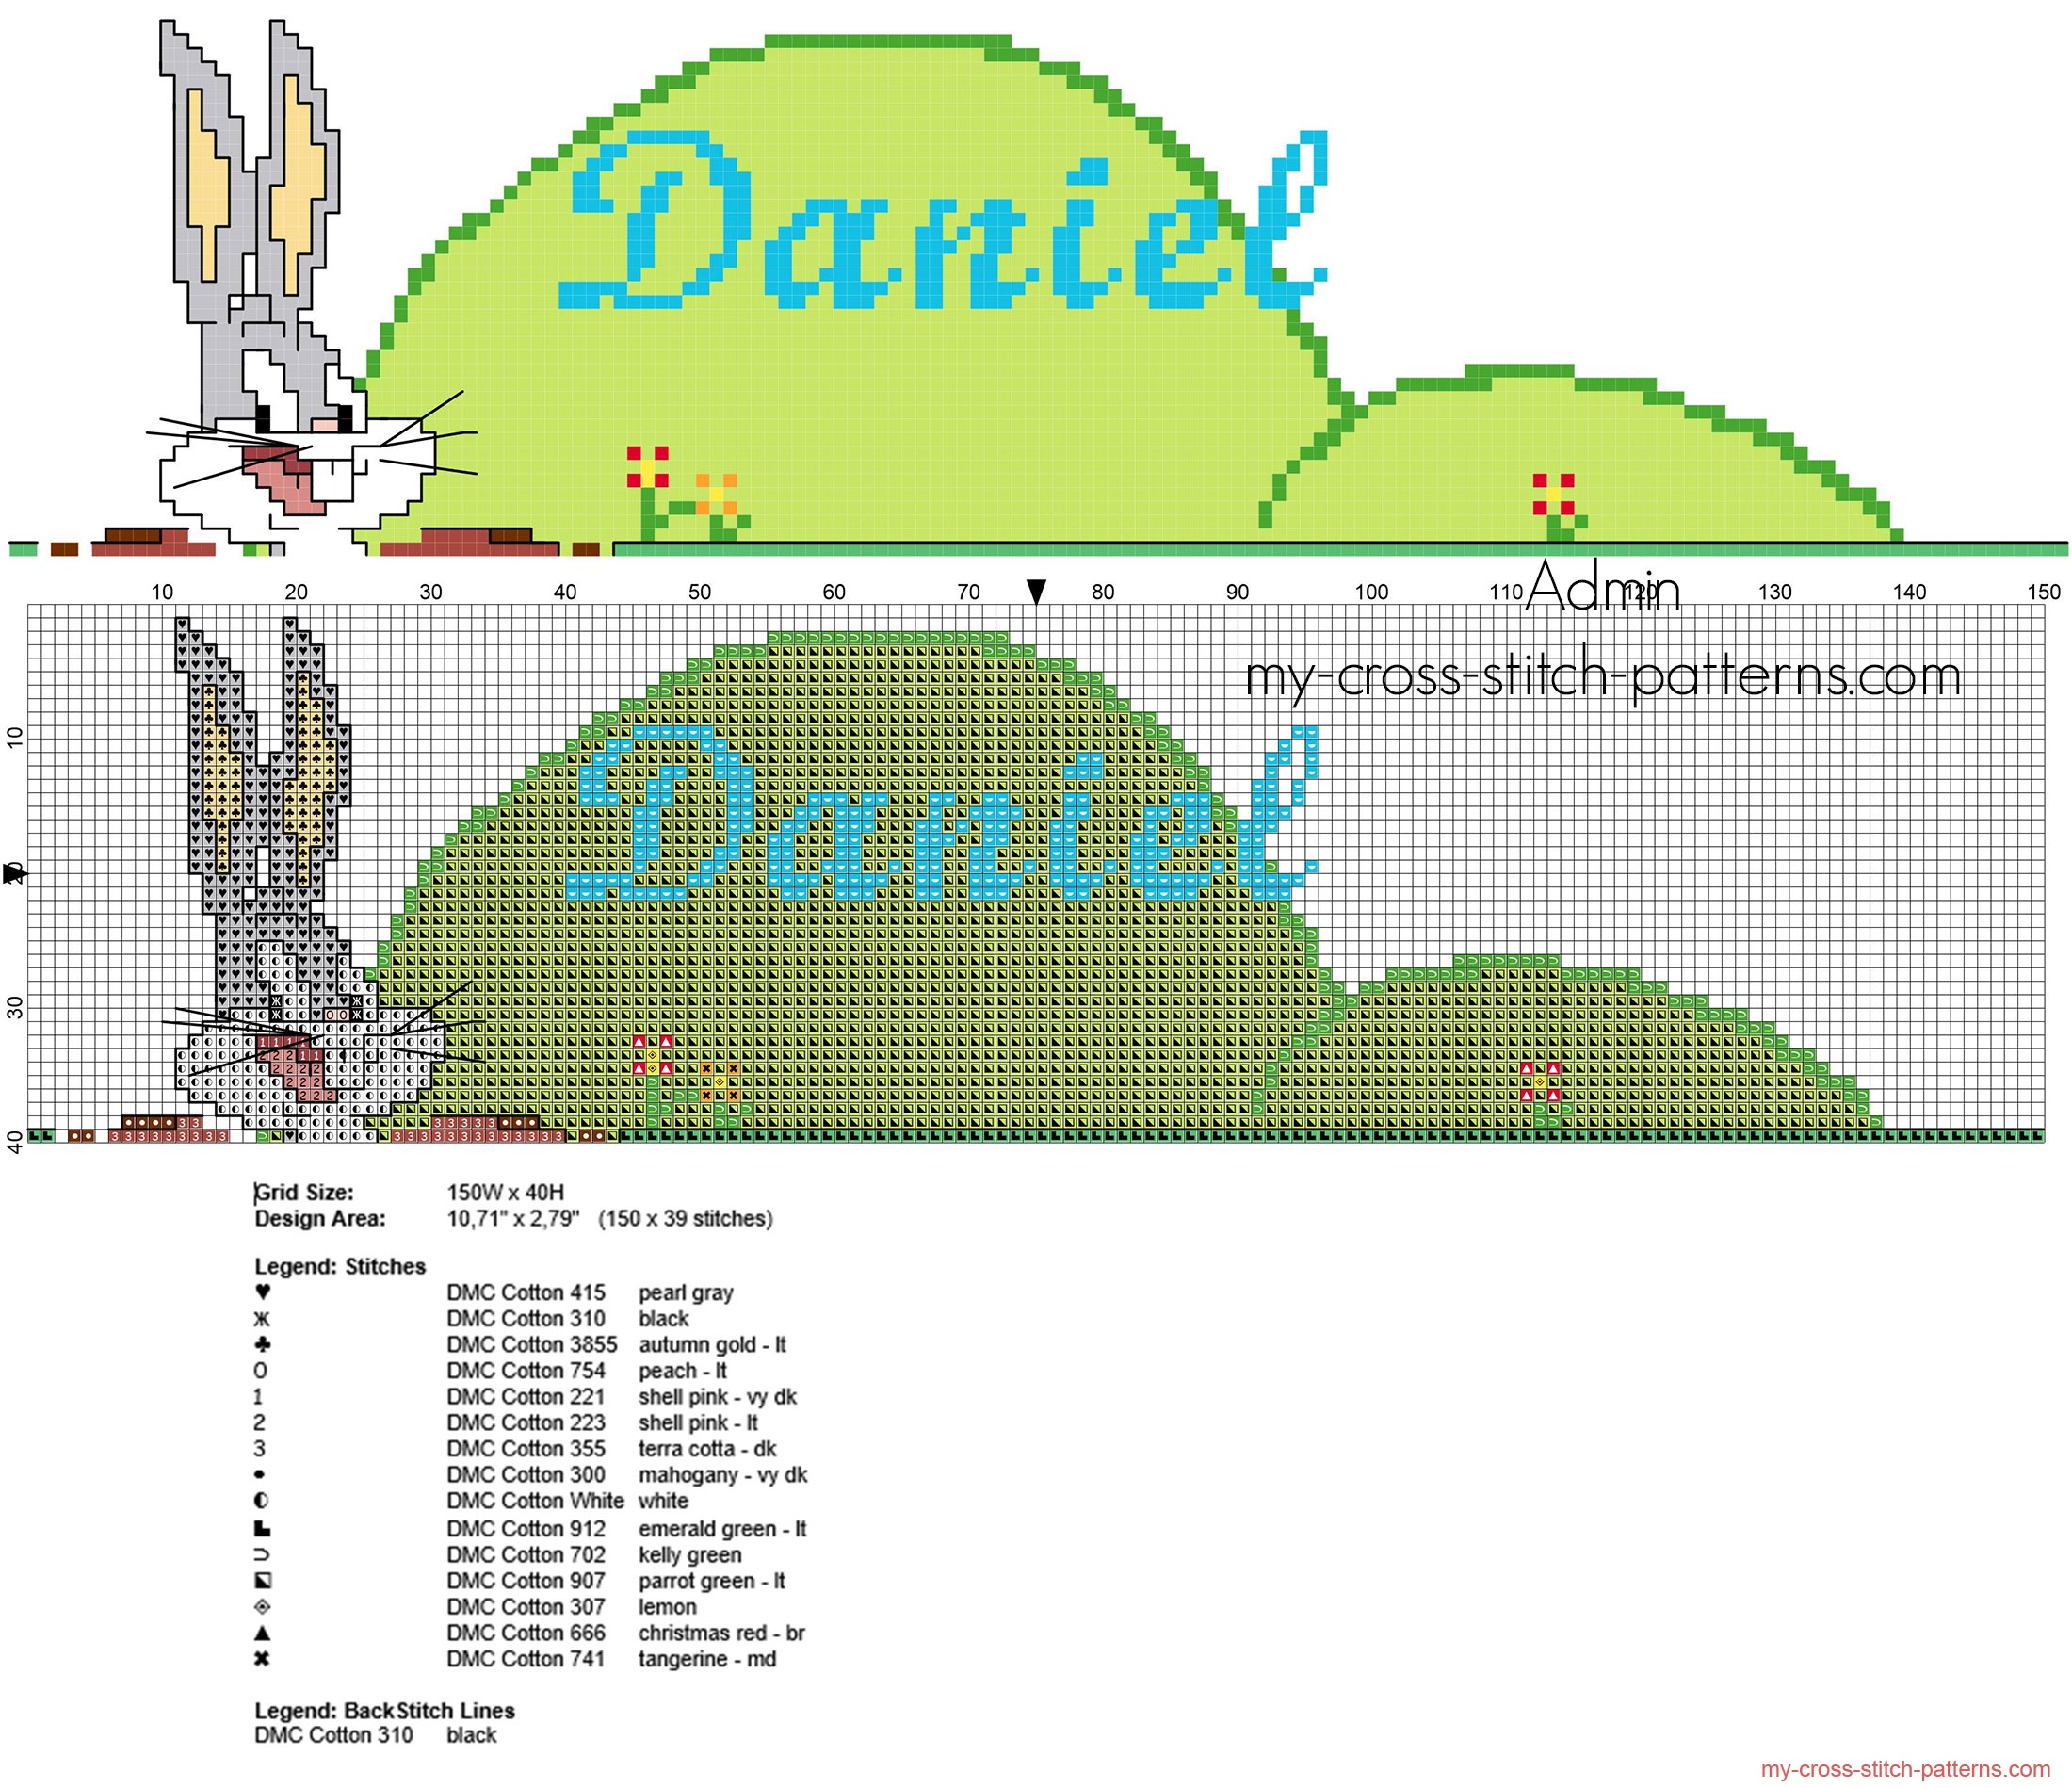 daniel_cross_stitch_baby_name_with_cartoons_character_bugs_bunny